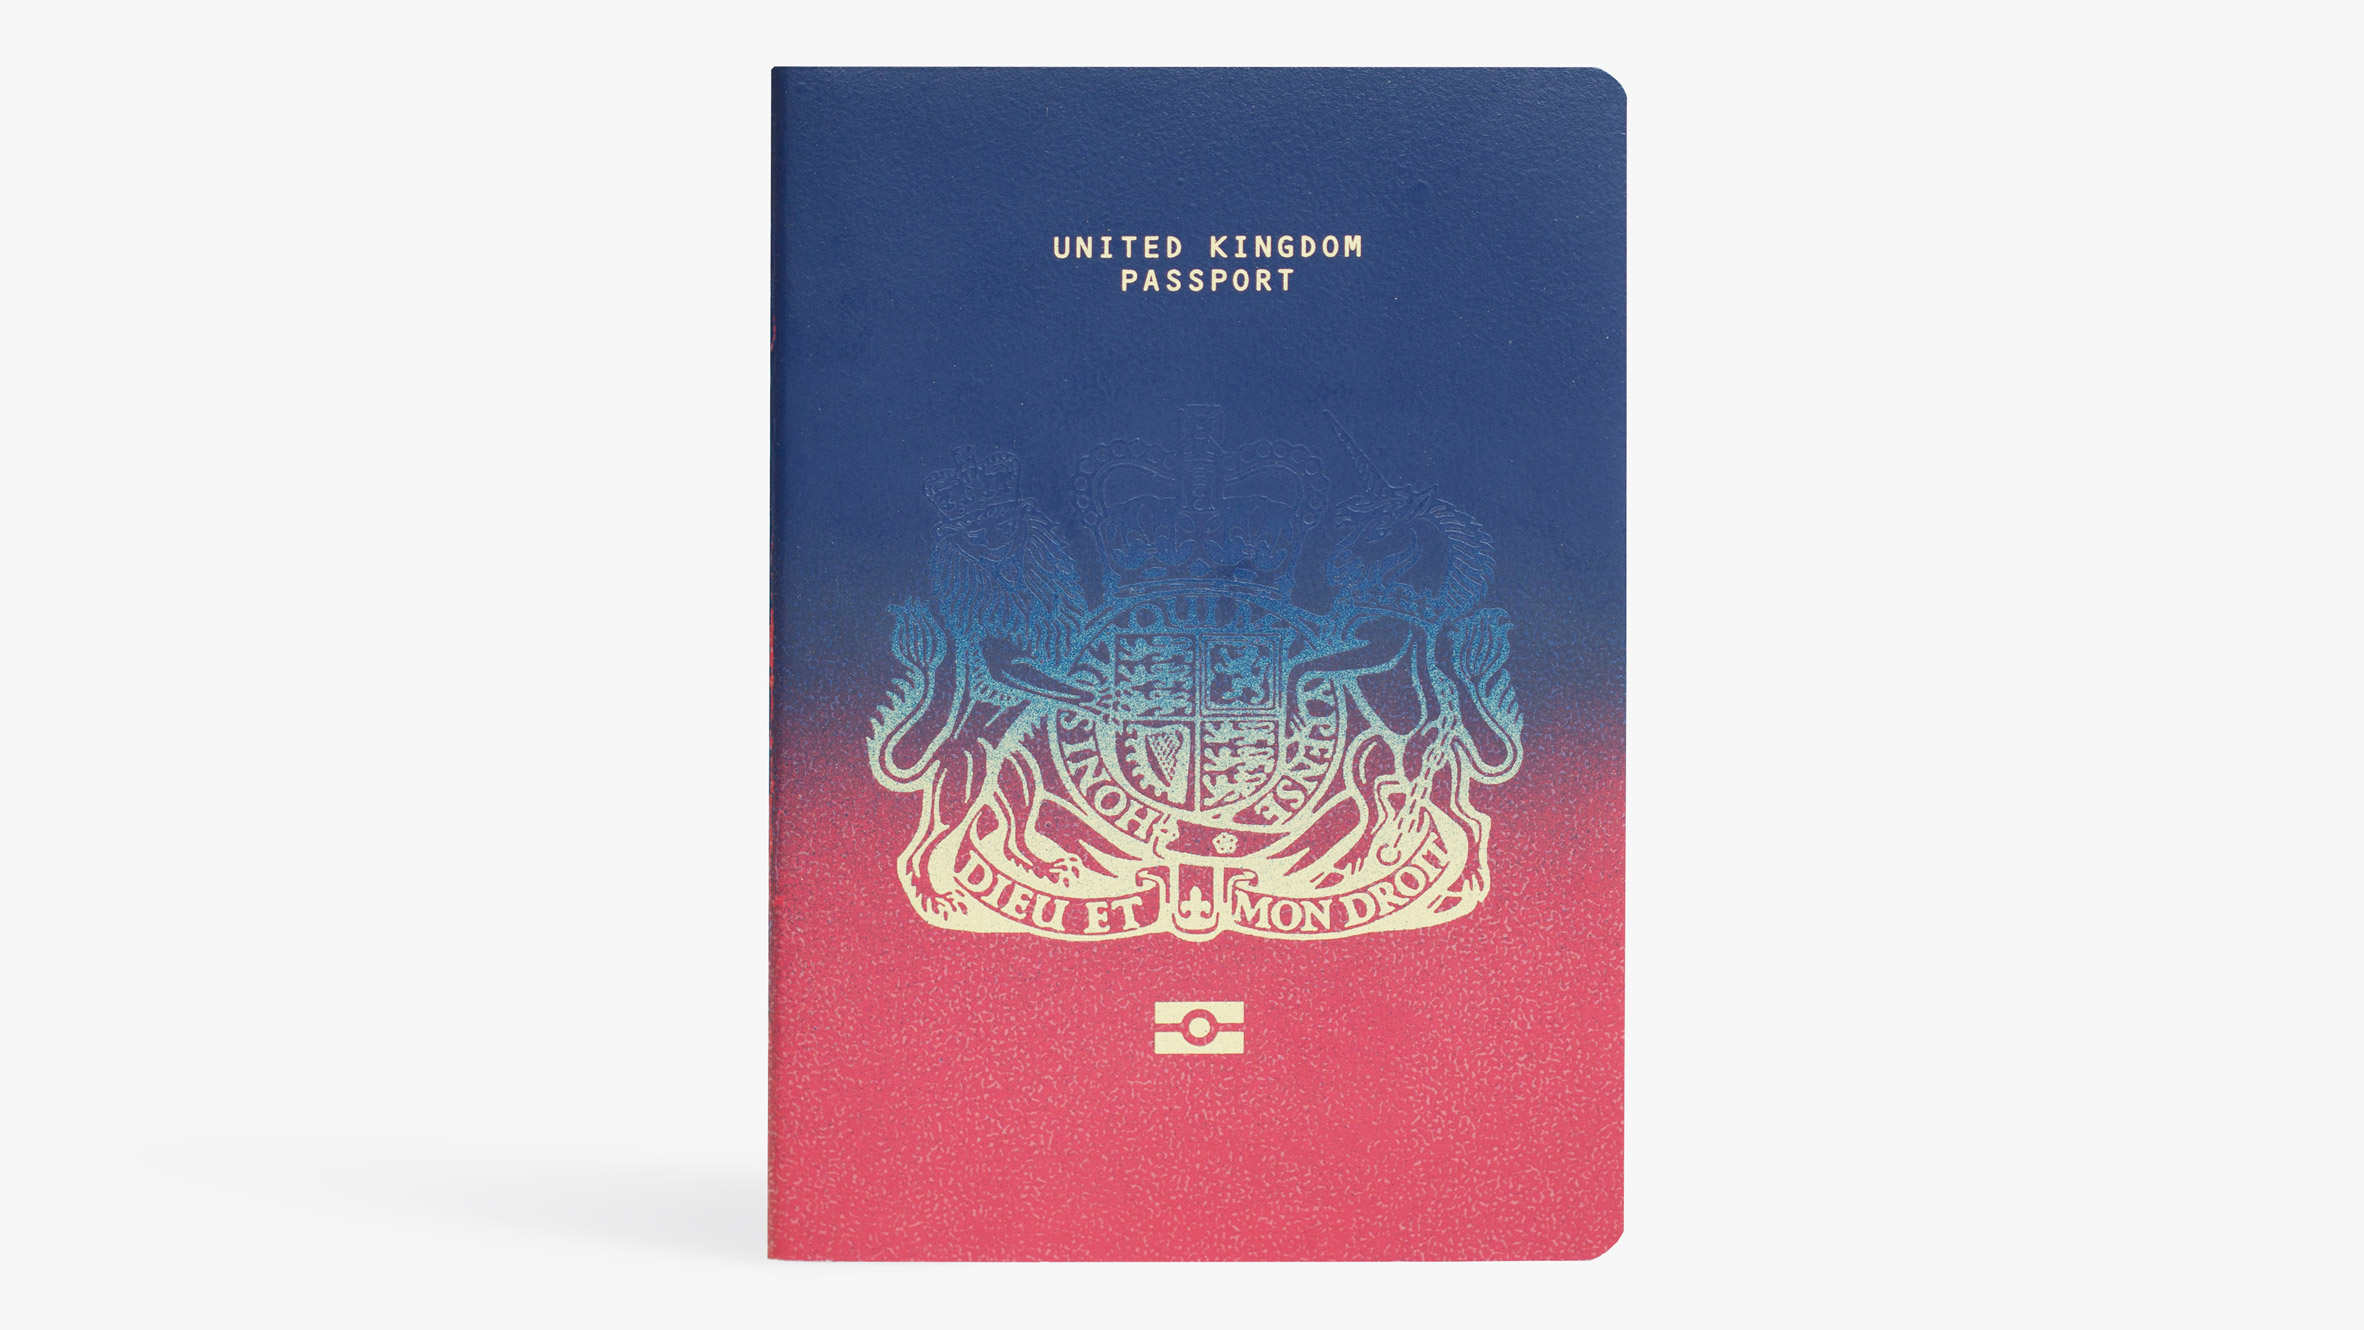 Poetic and powerful proposal by Scottish designer wins £1,000 Brexit  passport design competition